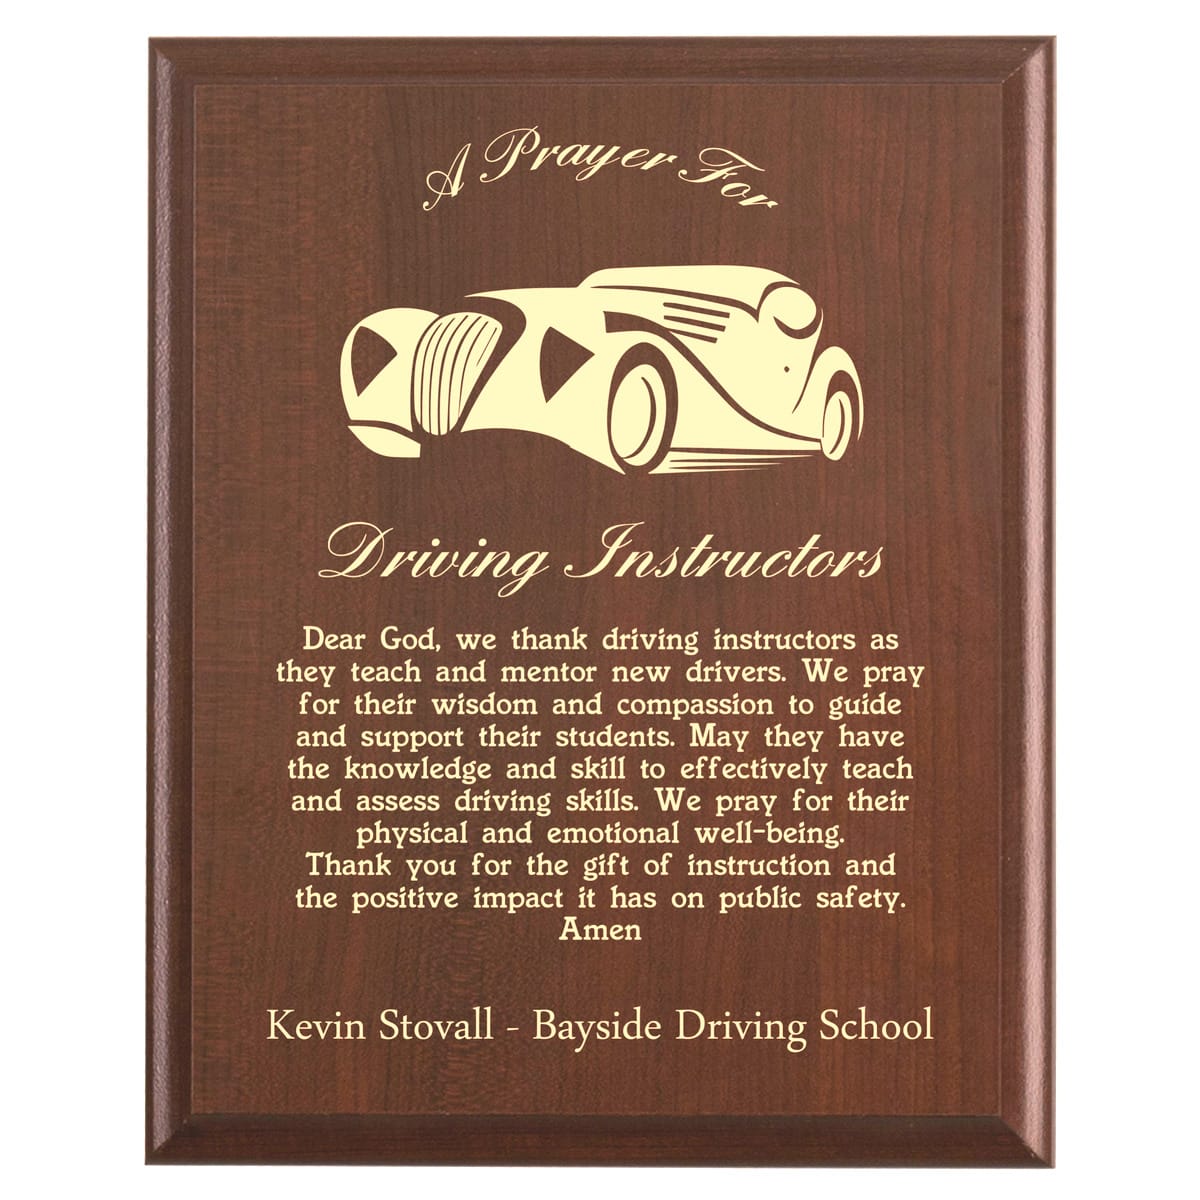 Plaque photo: Driving Instruction Prayer Plaque design with free personalization. Wood style finish with customized text.